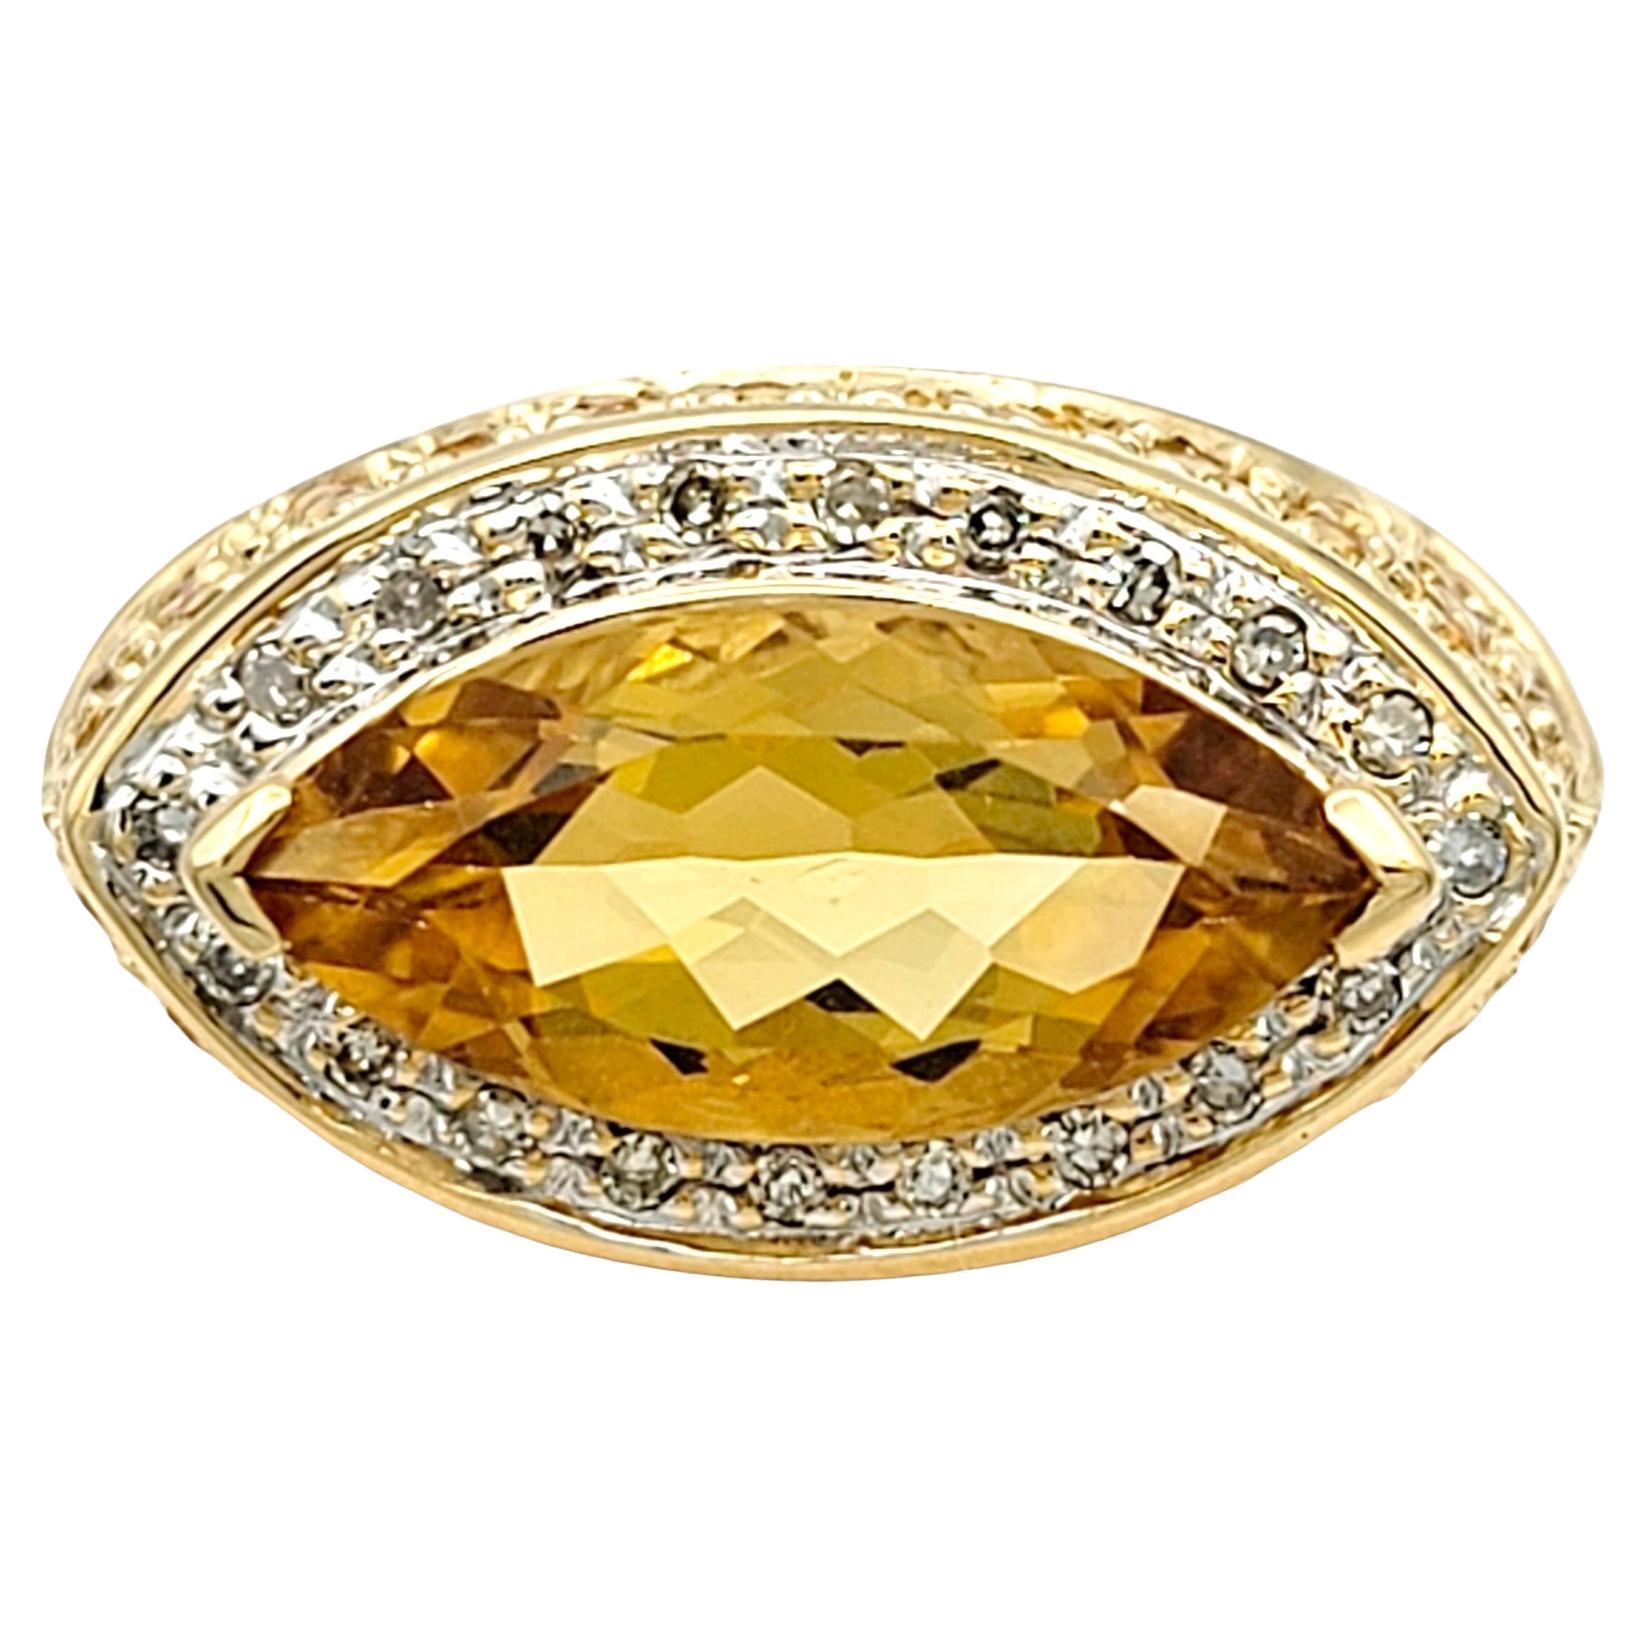 Marquis Cut Citrine Ring with Diamond and Yellow Sapphire Accents 14 Karat Gold 